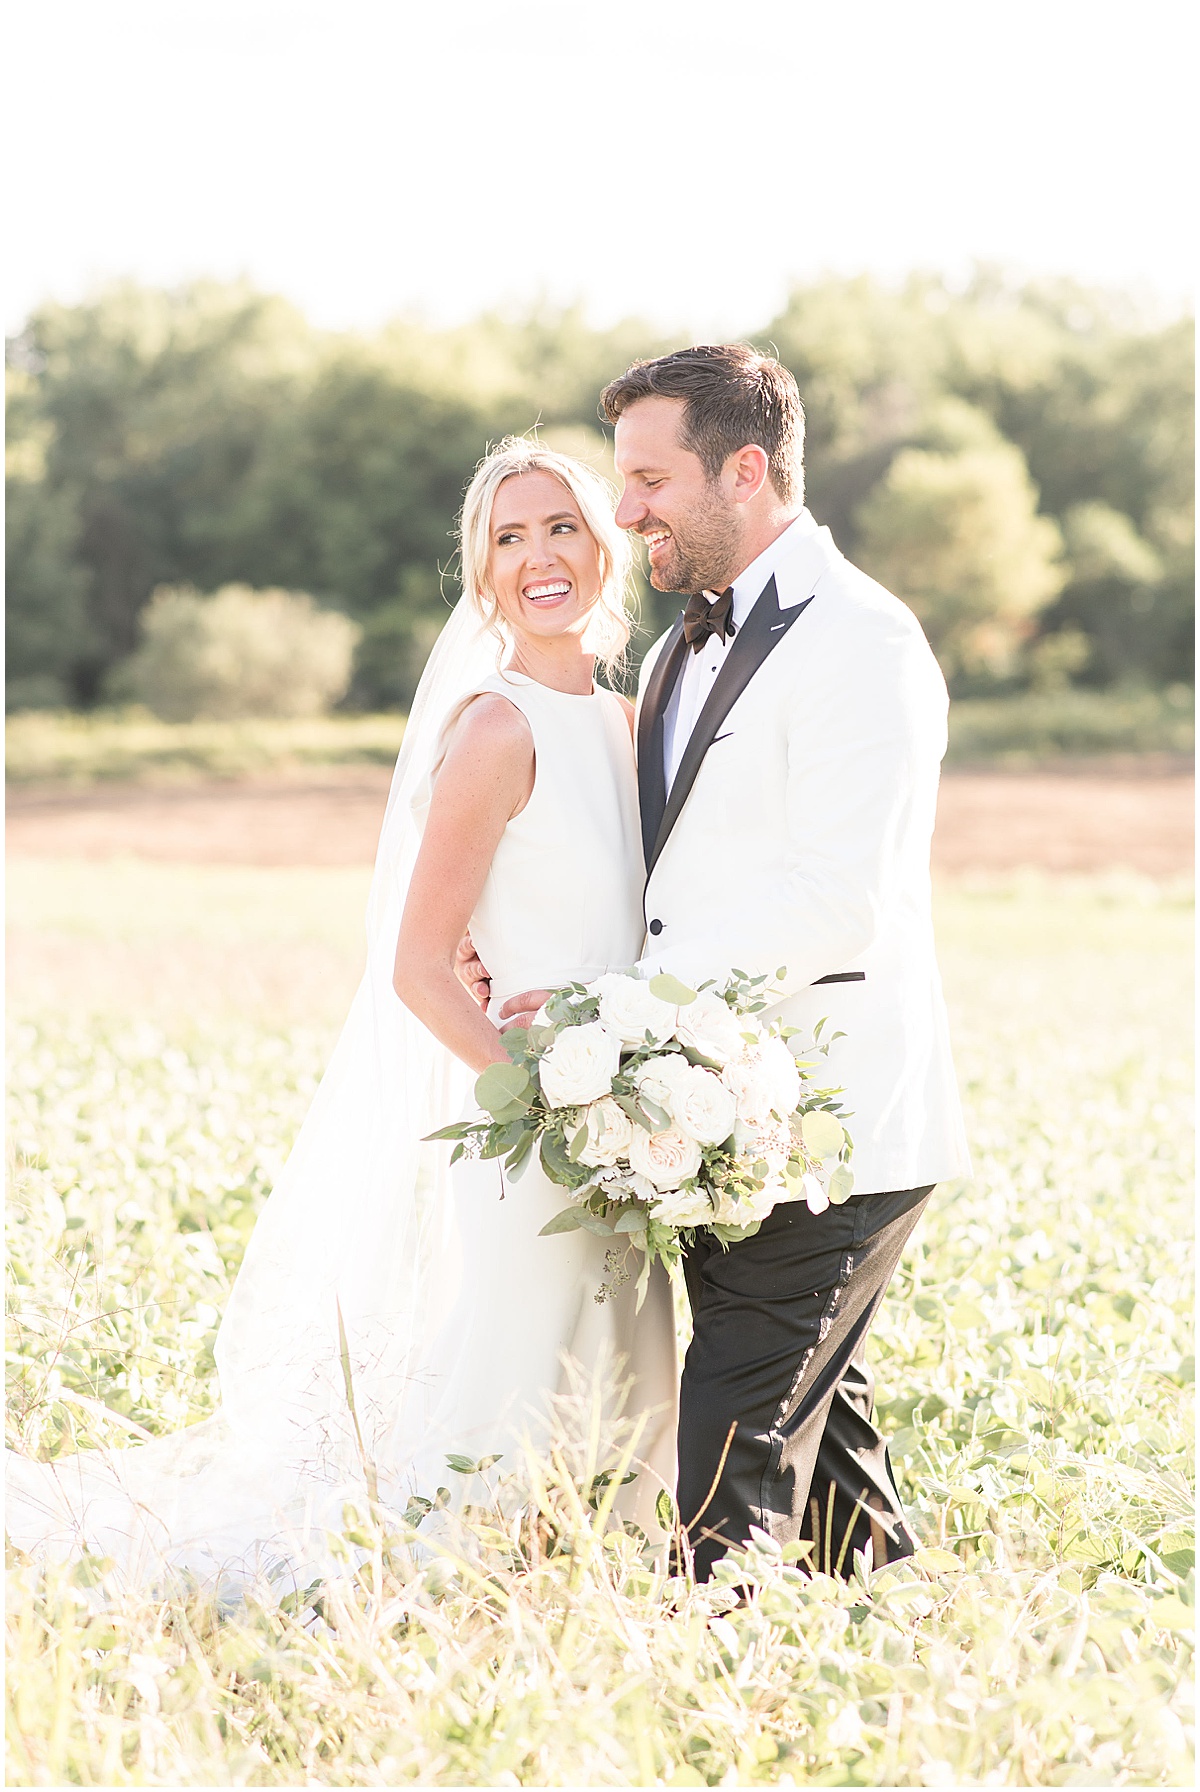 Wedding in Rochester, Indiana photographed by Victoria Rayburn Photography